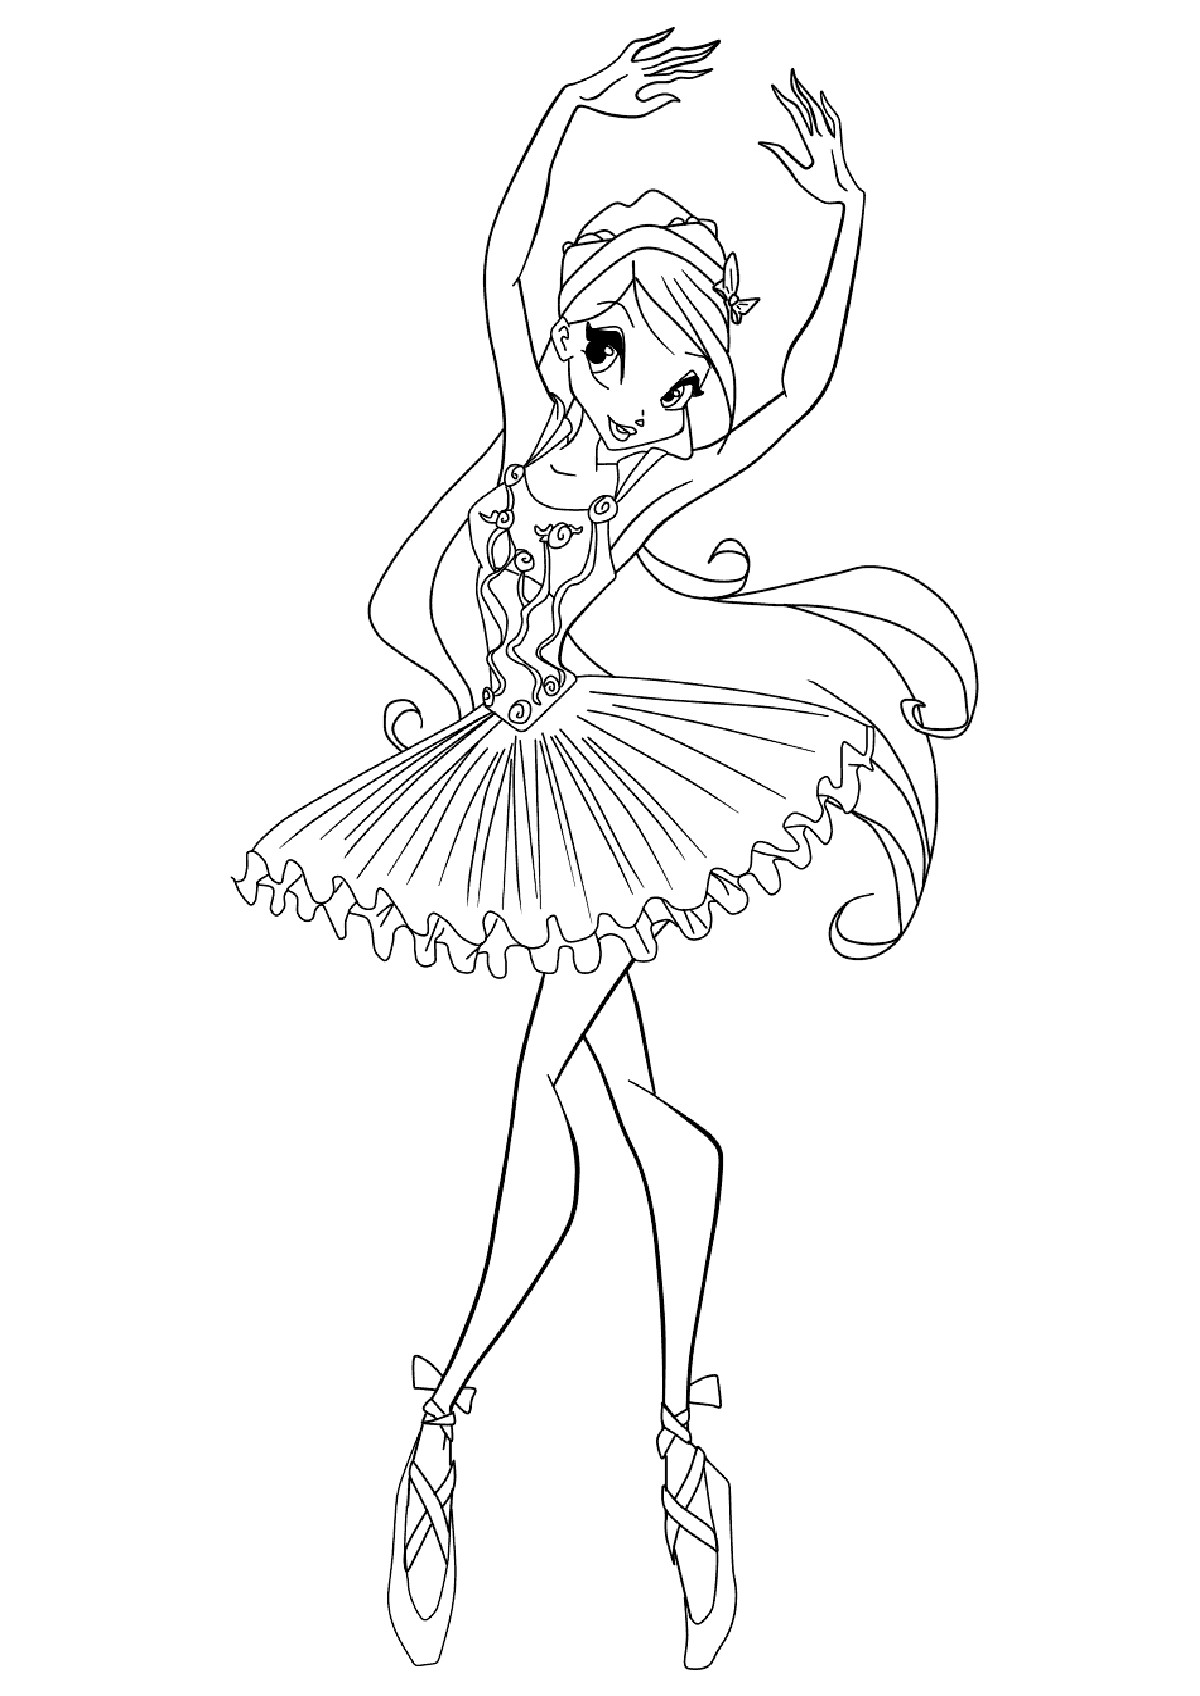 Ballerina Coloring Pages For Girls
 Ballerina Coloring Pages for childrens printable for free